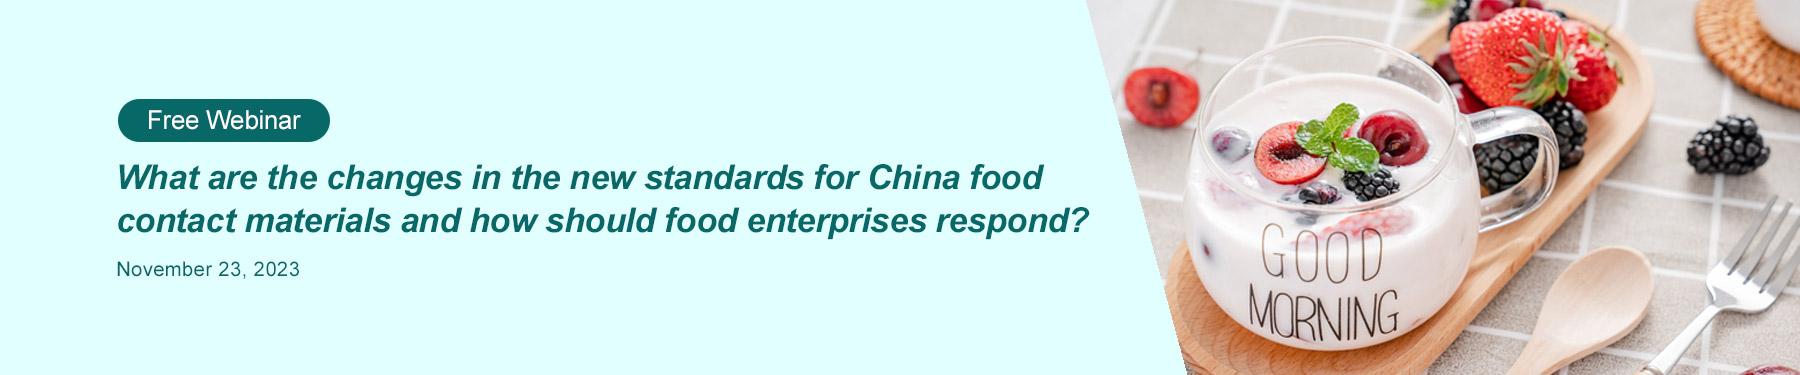 https://www.cirs-group.com/en/food/cirs-free-webinar-what-are-the-changes-in-the-new-standards-for-china-food-contact-materials-and-how-should-food-enterprises-respond